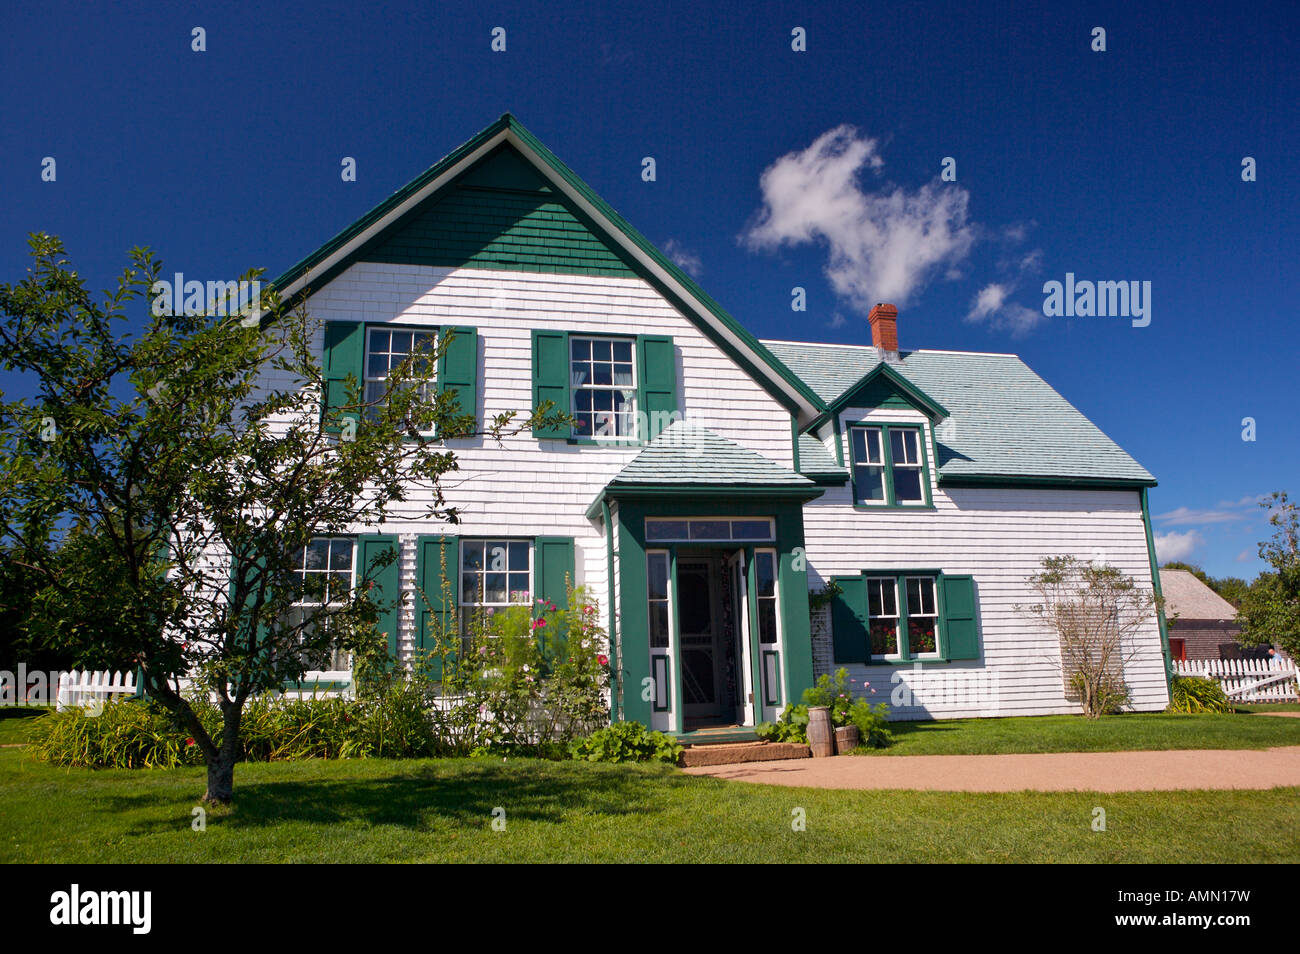 Site of Lucy Maud Montgomery's Cavendish home, Blue Heron Coastal Drive, Queens, Anne's Land, Prince Edward Island, Canada. Stock Photo